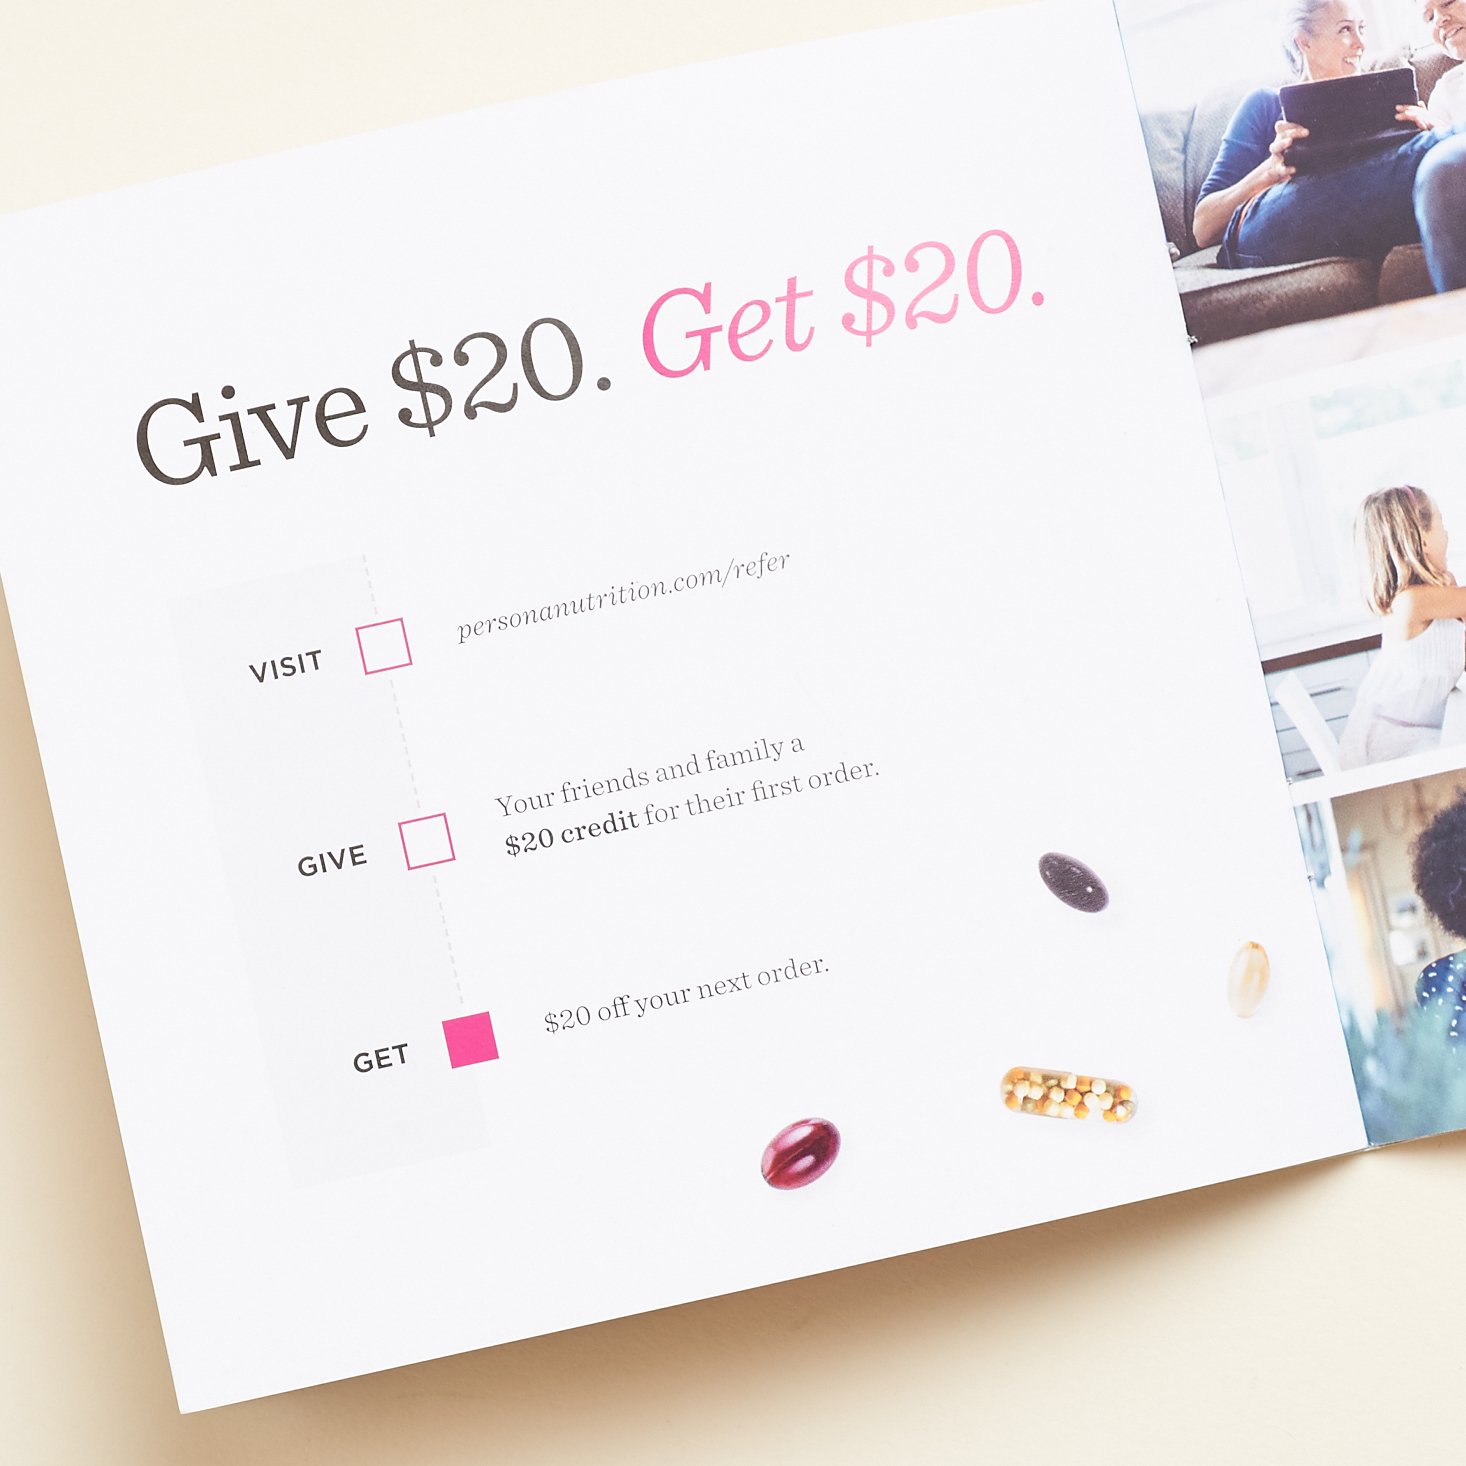 Give $20, Get $20 referral explanation